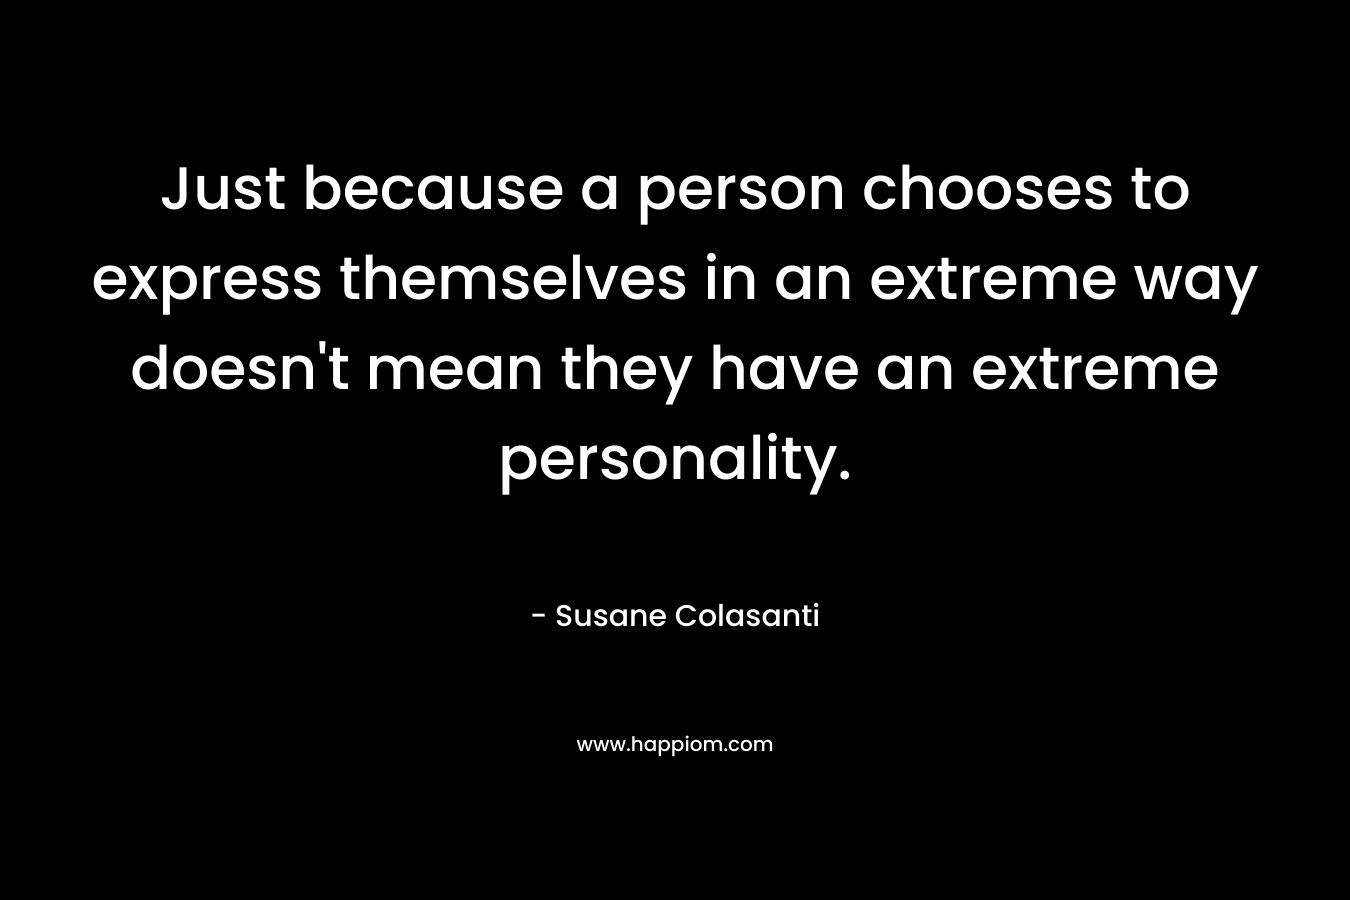 Just because a person chooses to express themselves in an extreme way doesn’t mean they have an extreme personality. – Susane Colasanti